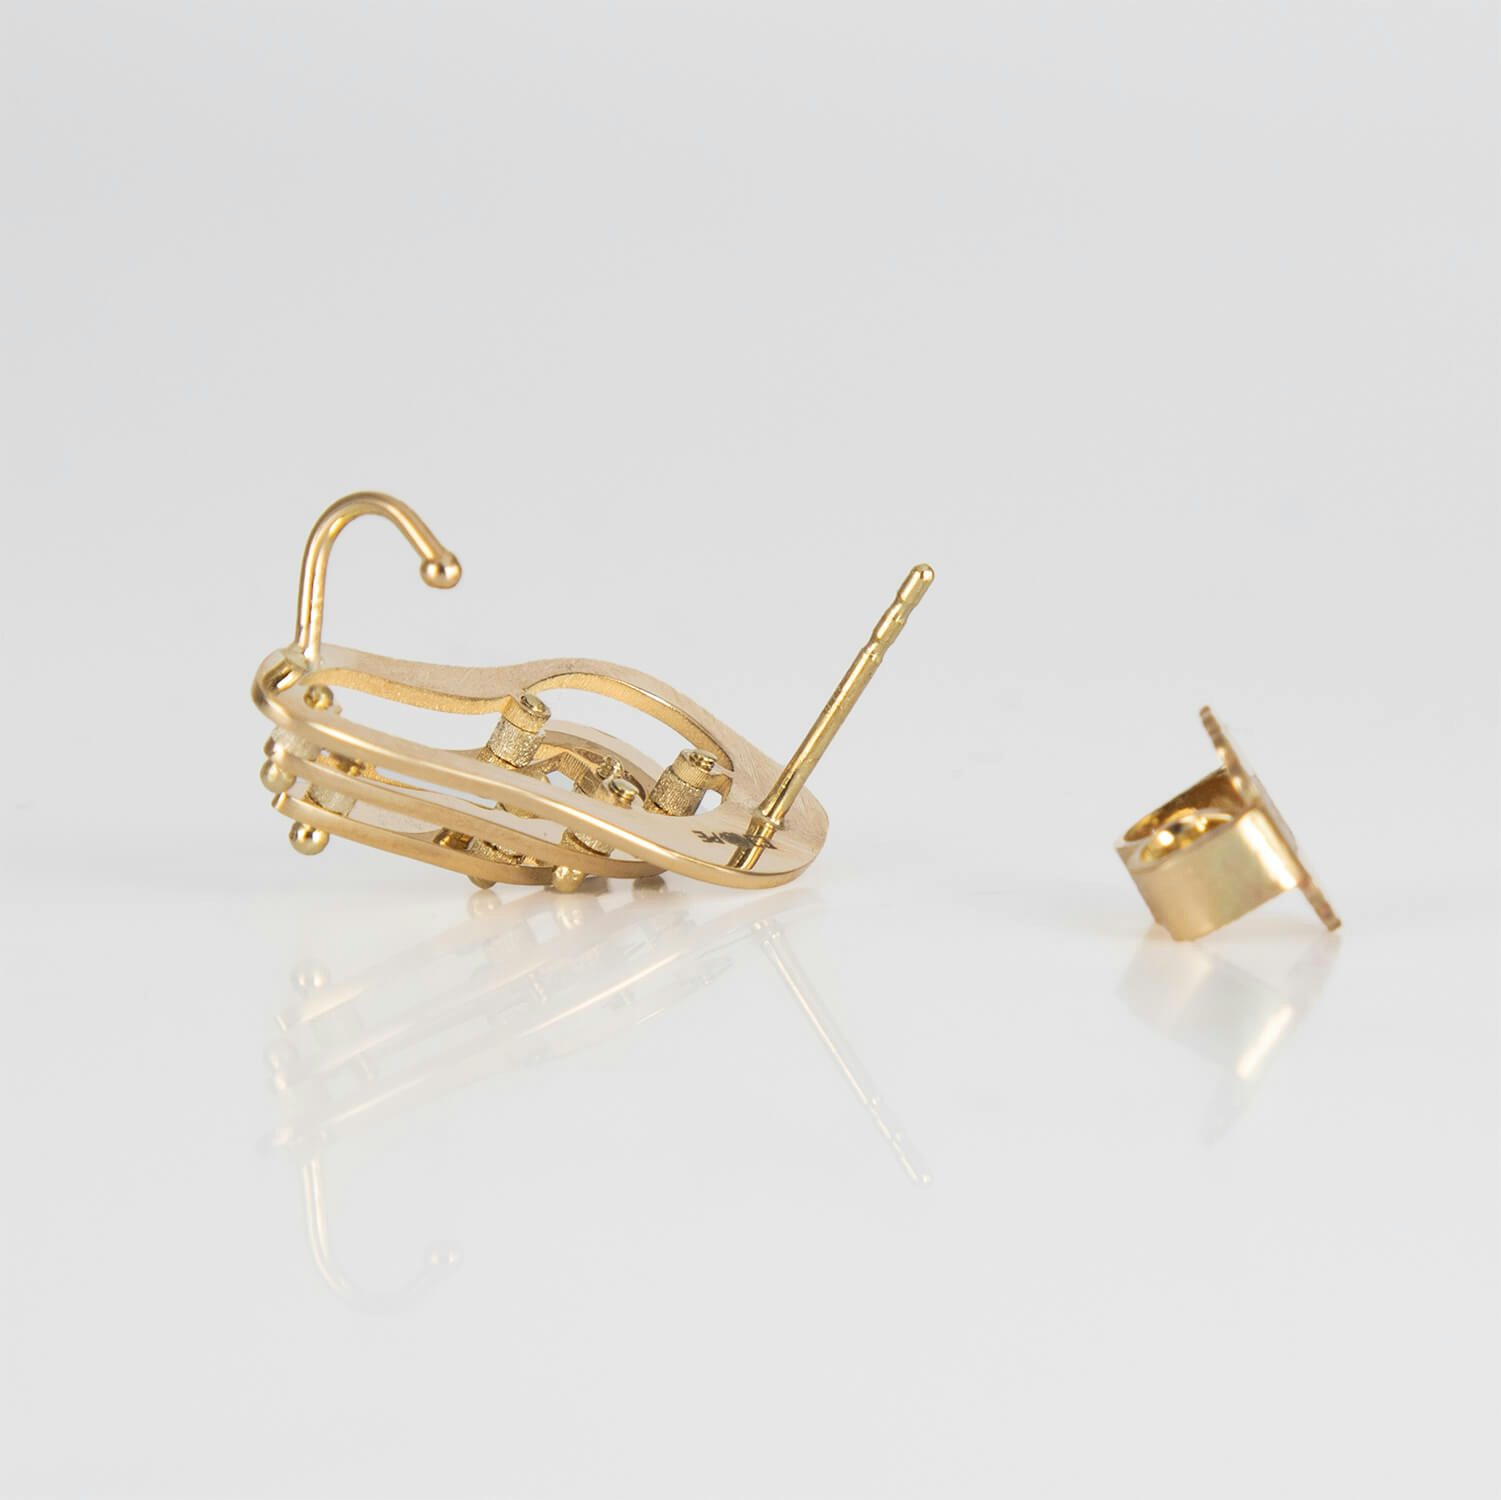 STACK, EARRING SMALL, 14K SOLID GOLD, DETAIL, WEB